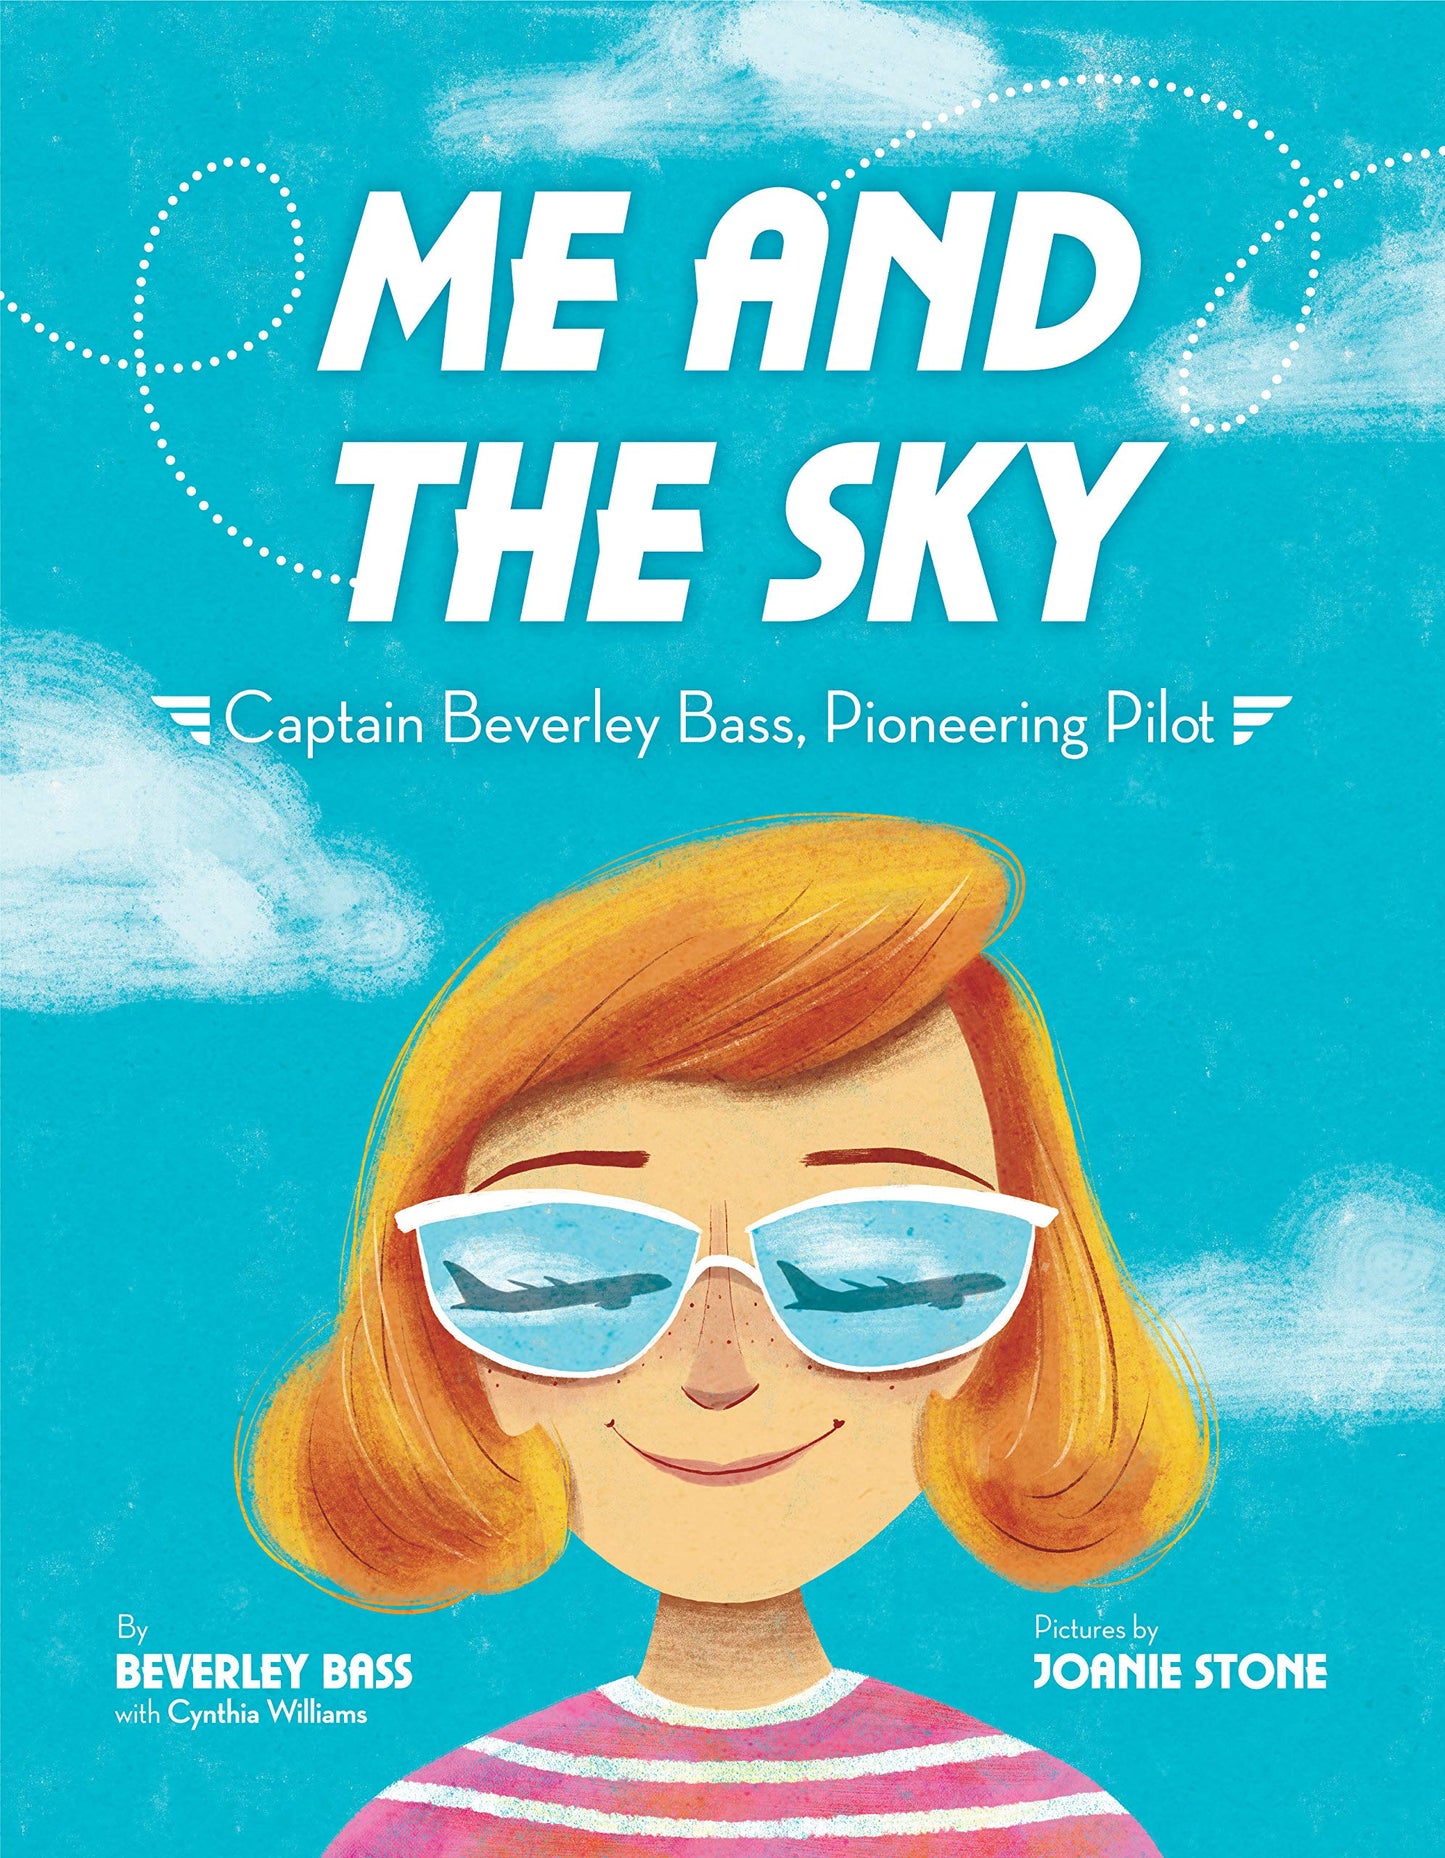 Me and the Sky: Captain Beverly Bass, Pioneering Pilot